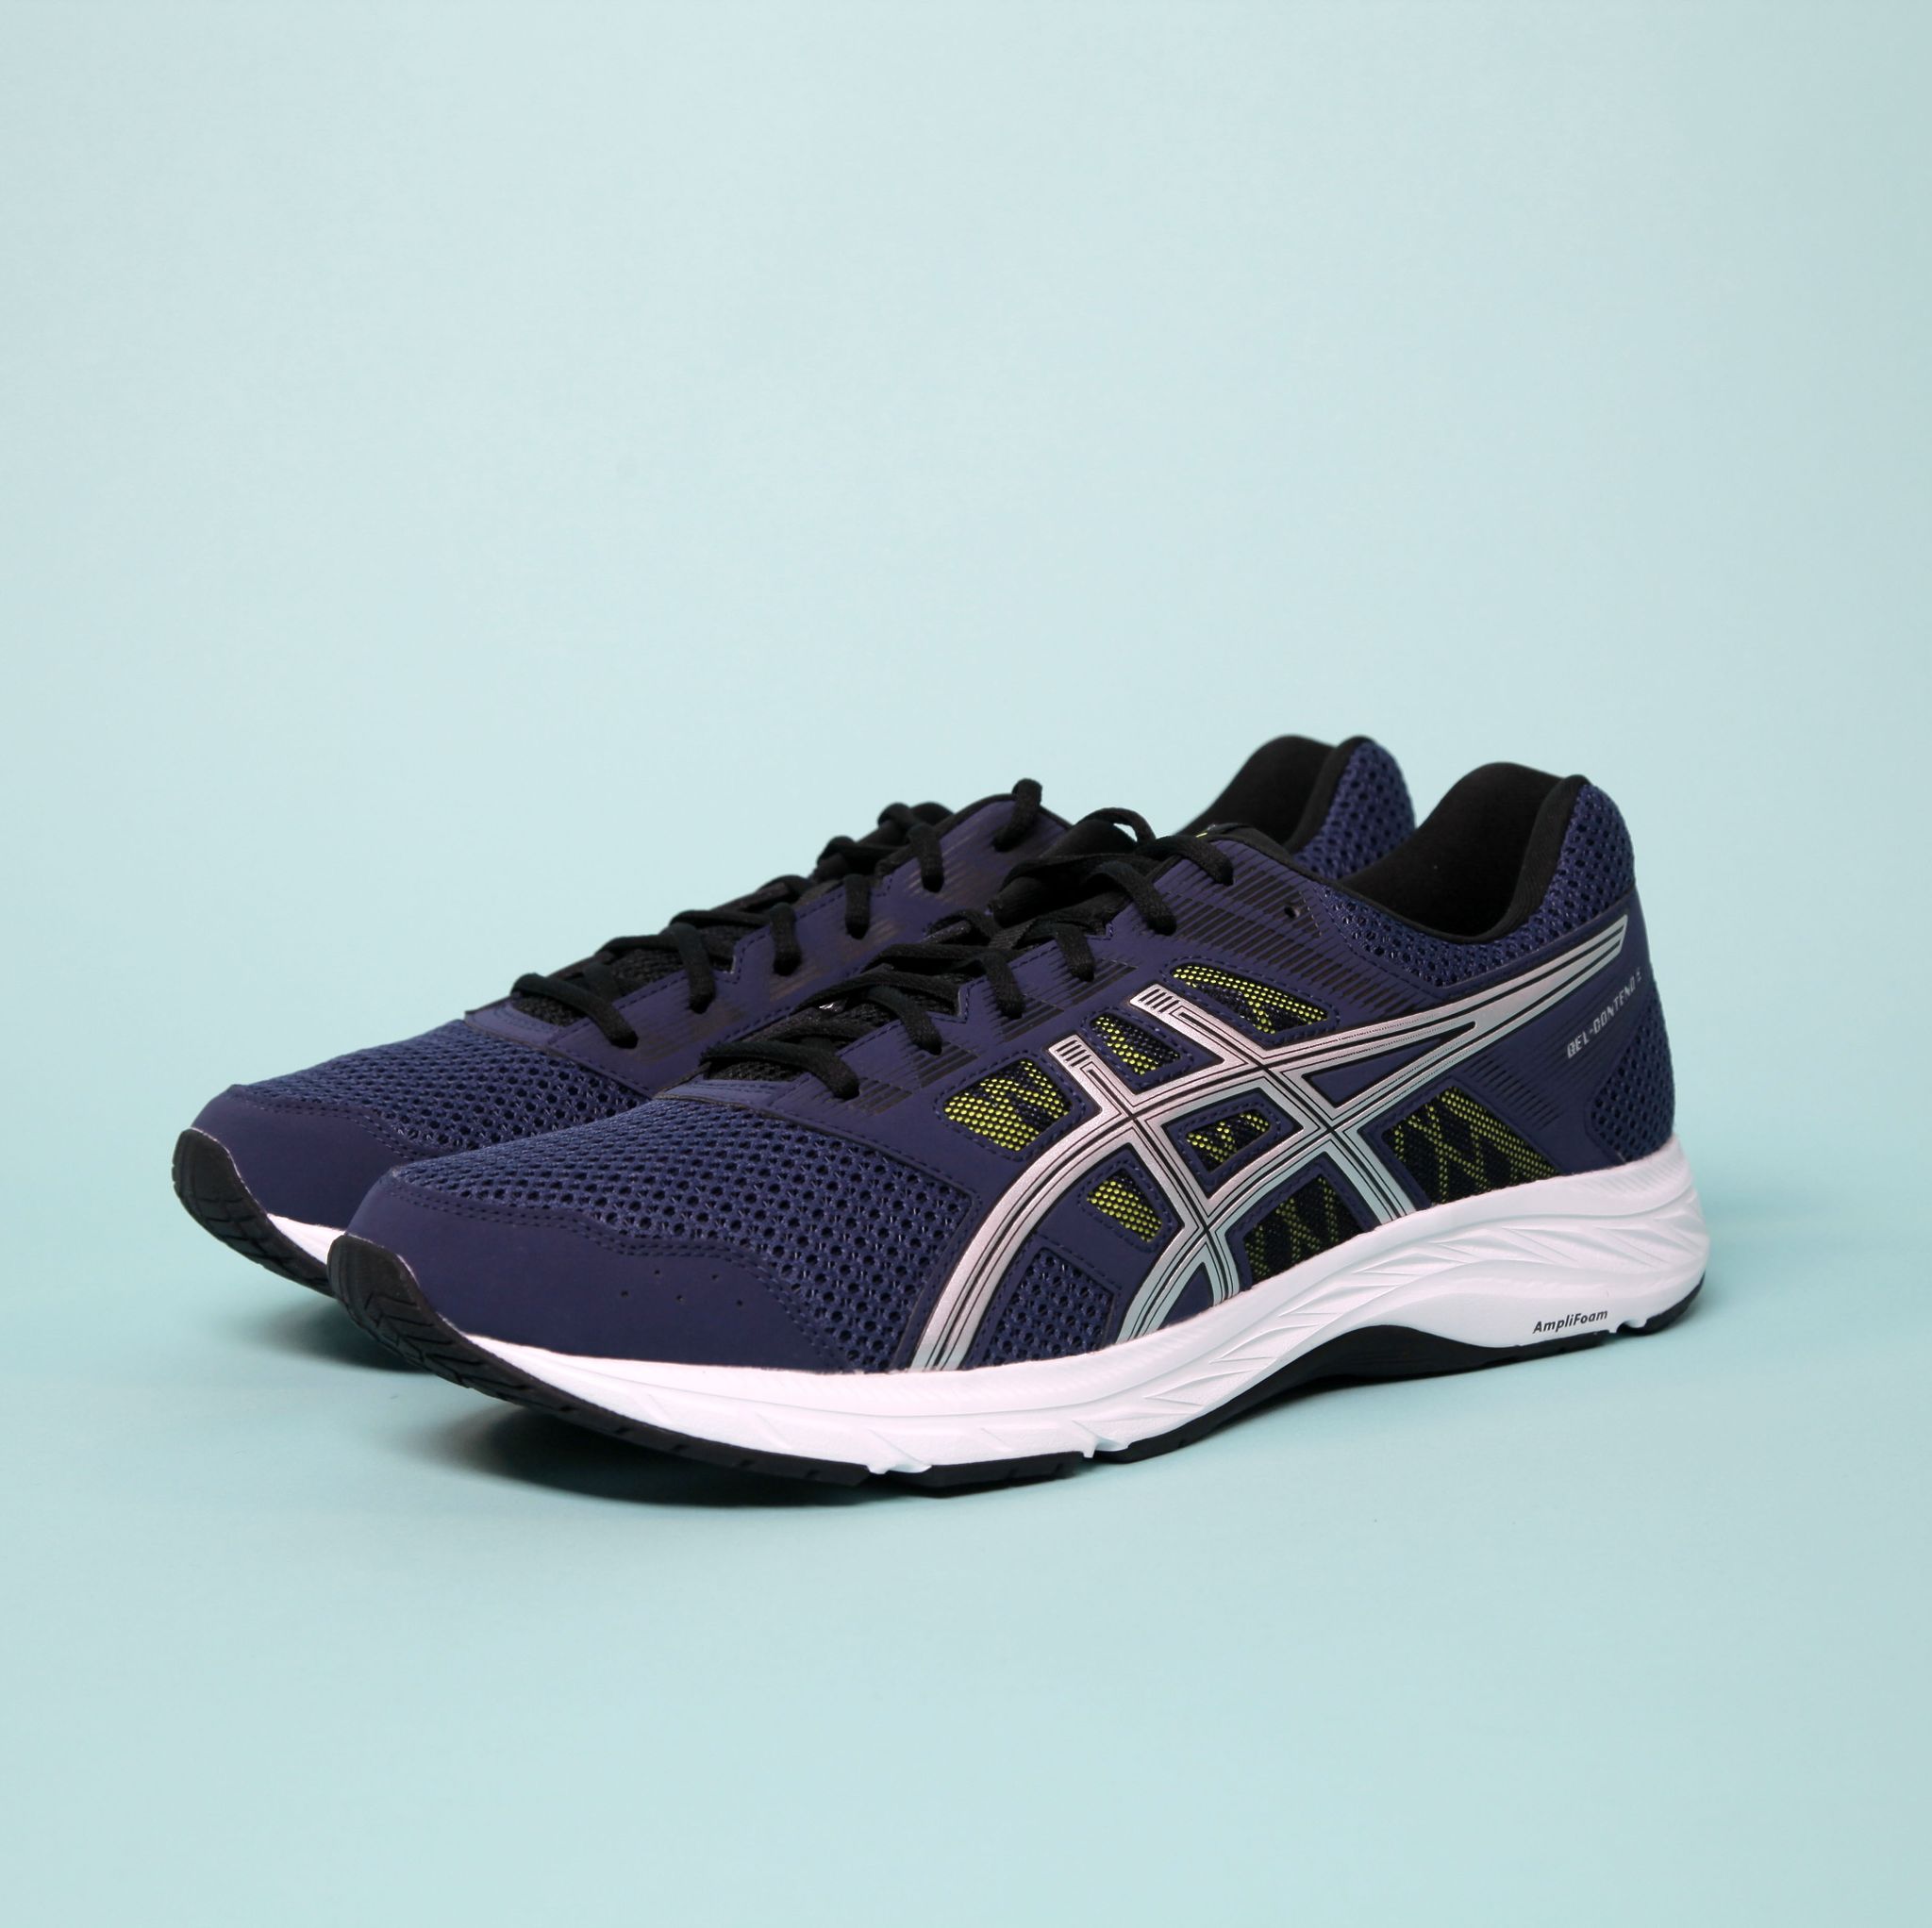 This £55 Asics shoe won our best value shoe award, here's why